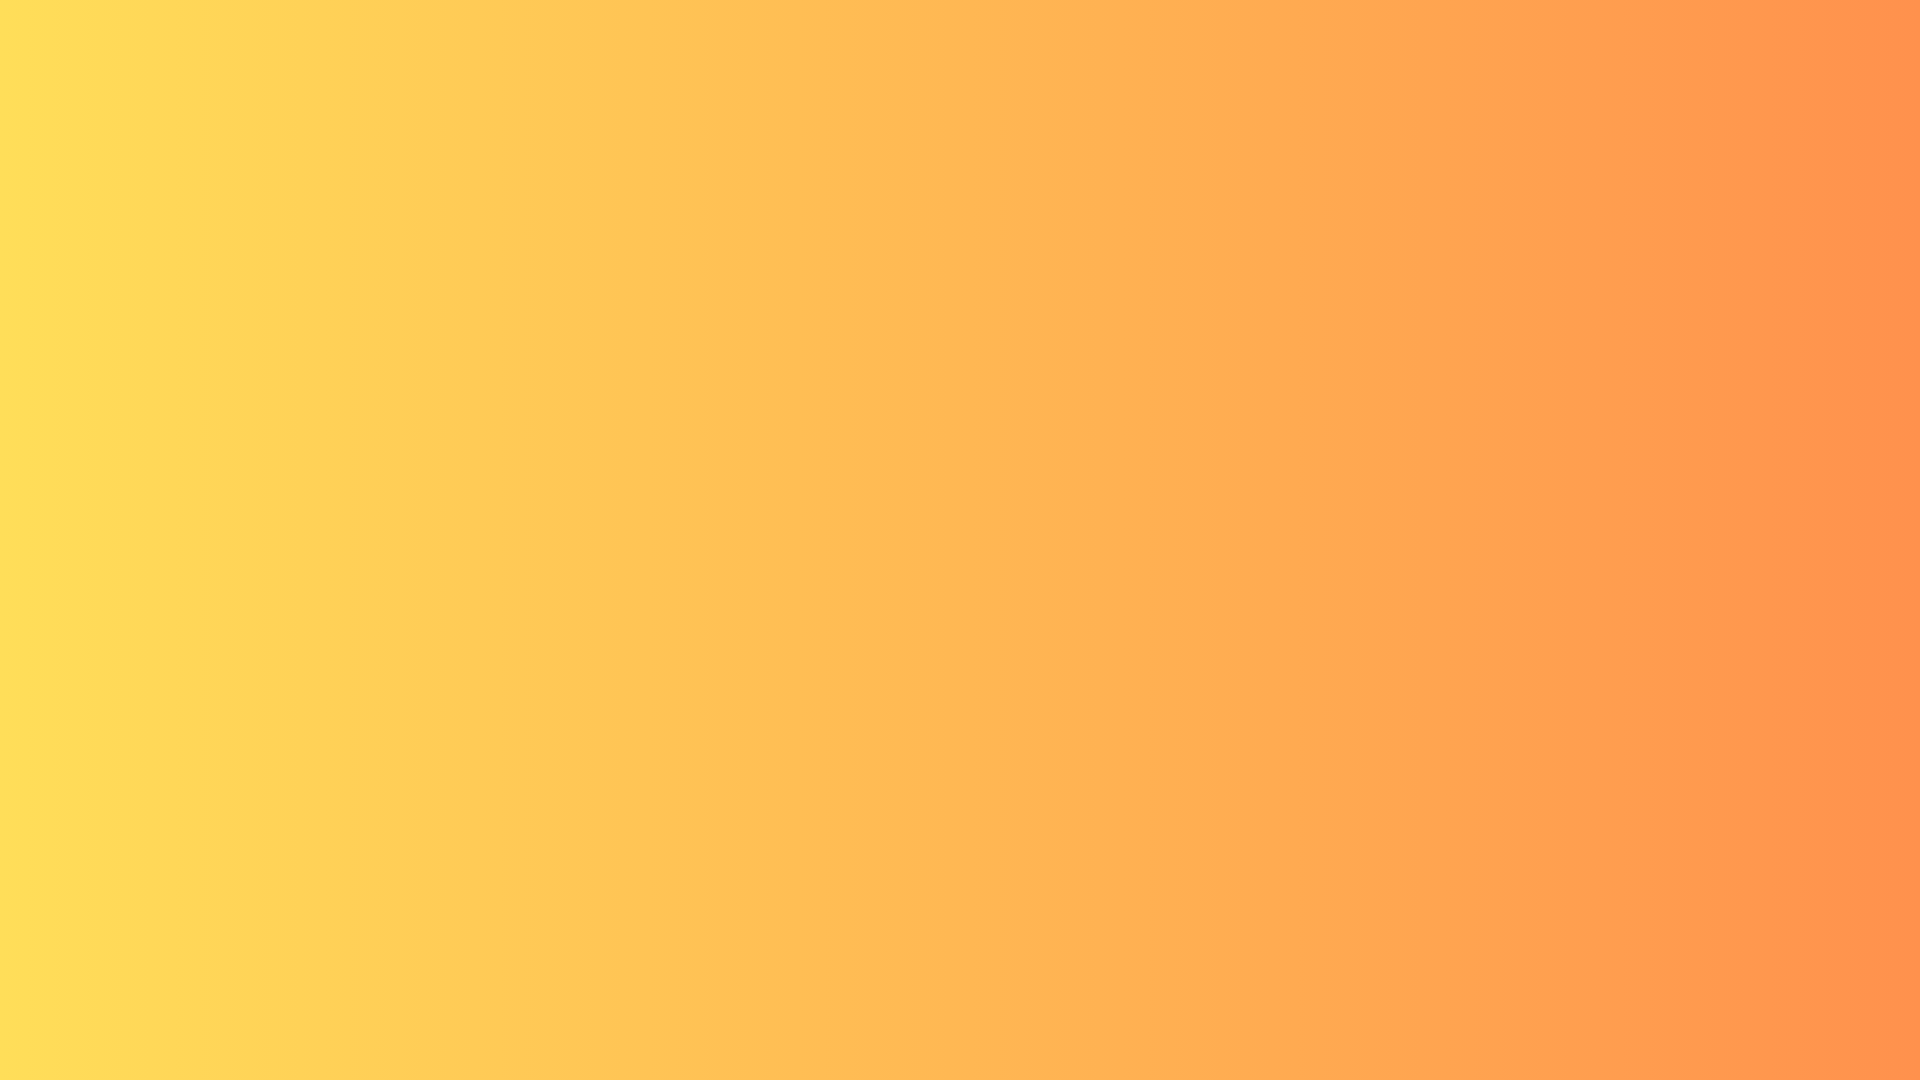 Orange background used for the background of the header image/